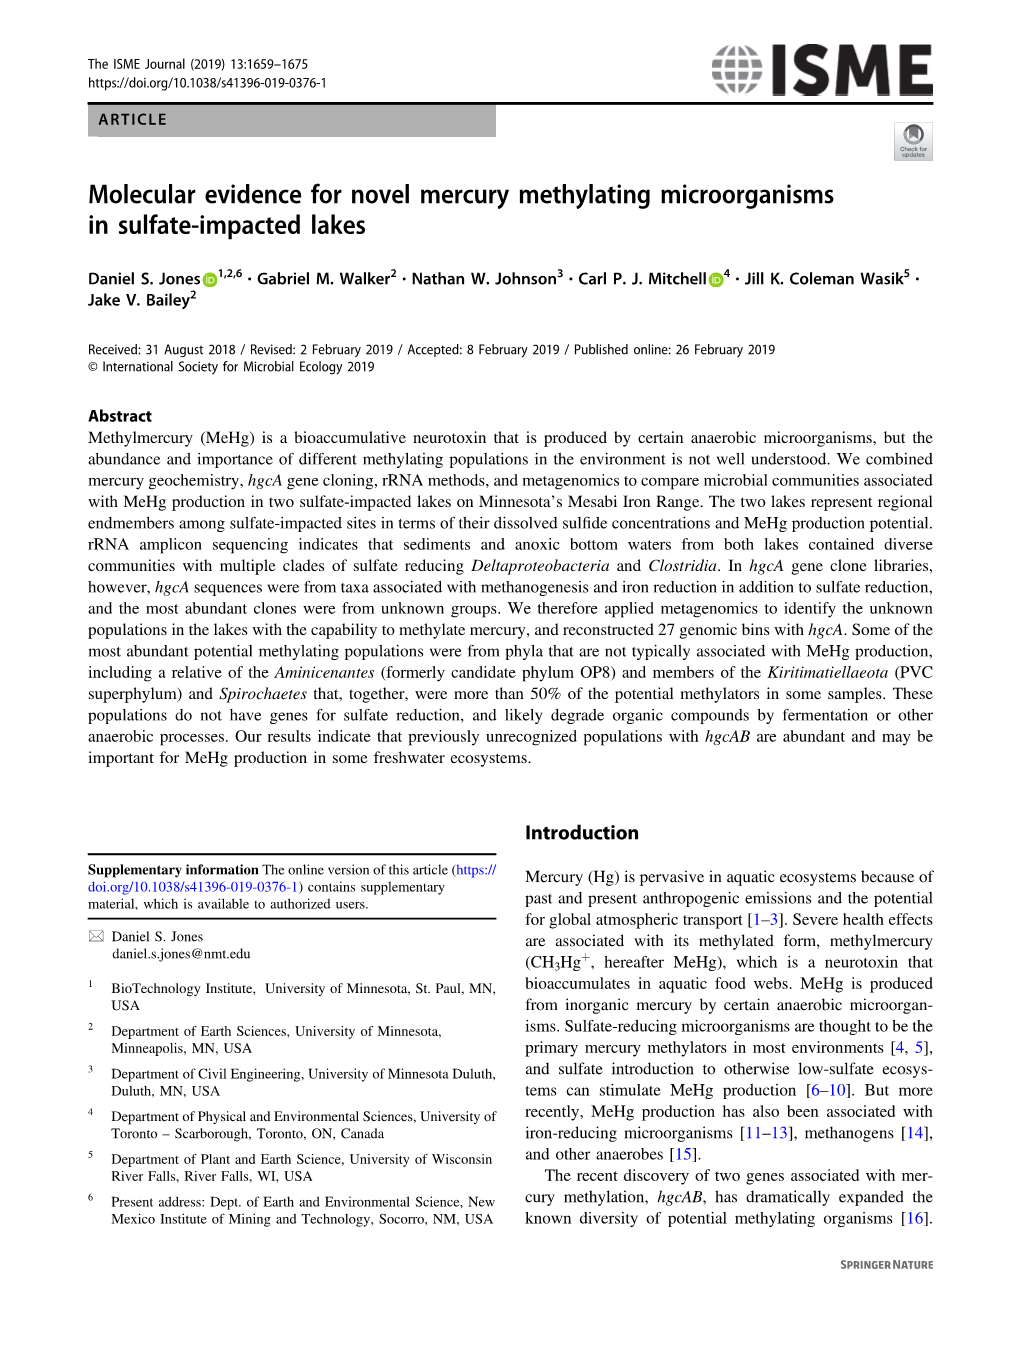 Molecular Evidence for Novel Mercury Methylating Microorganisms in Sulfate-Impacted Lakes